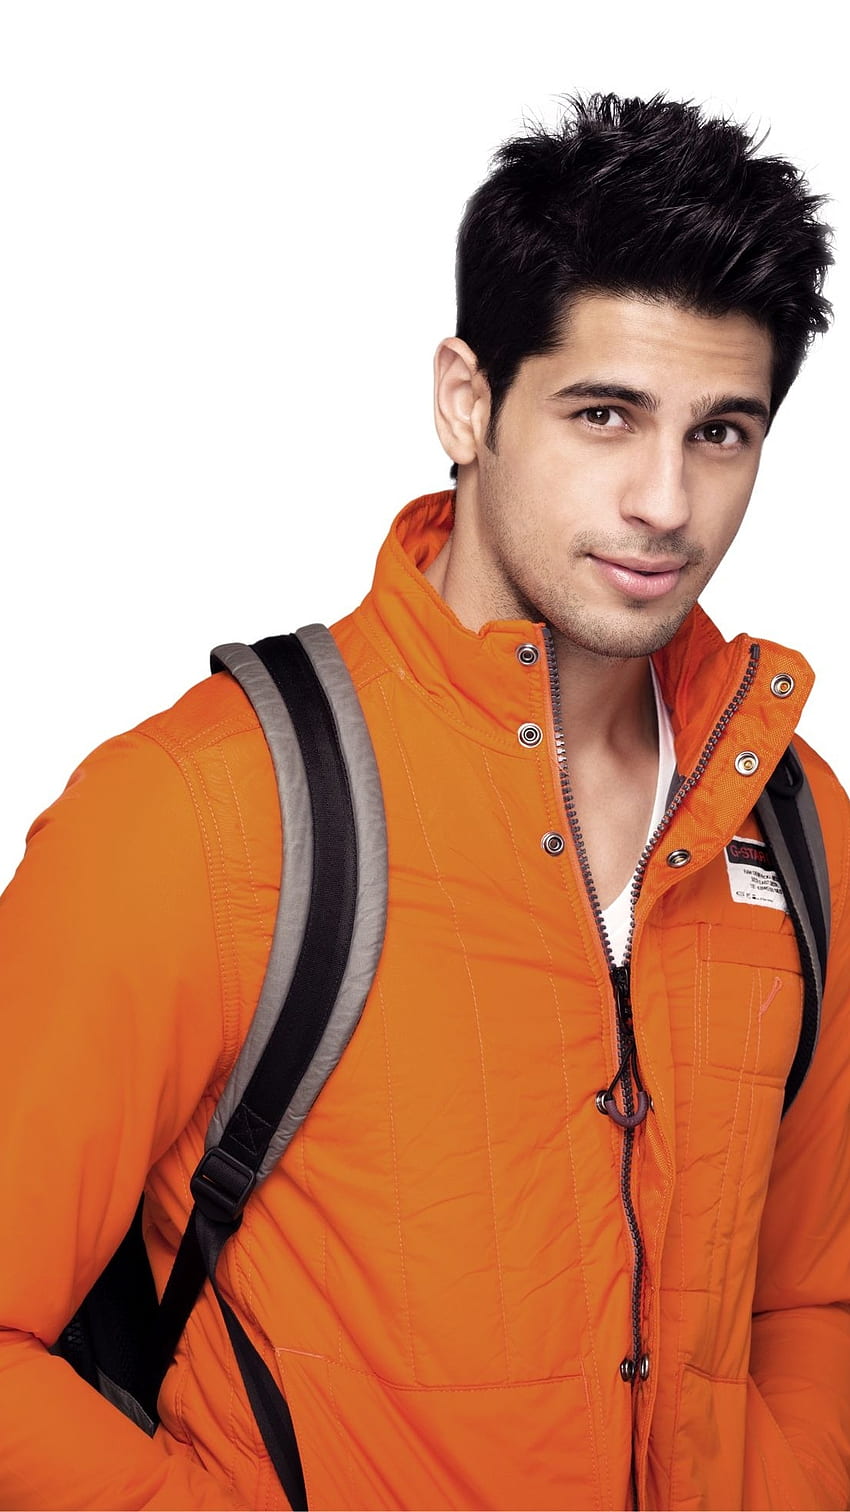 Have made space in action genre with Brothers Sidharth Malhotra   Entertainment NewsThe Indian Express